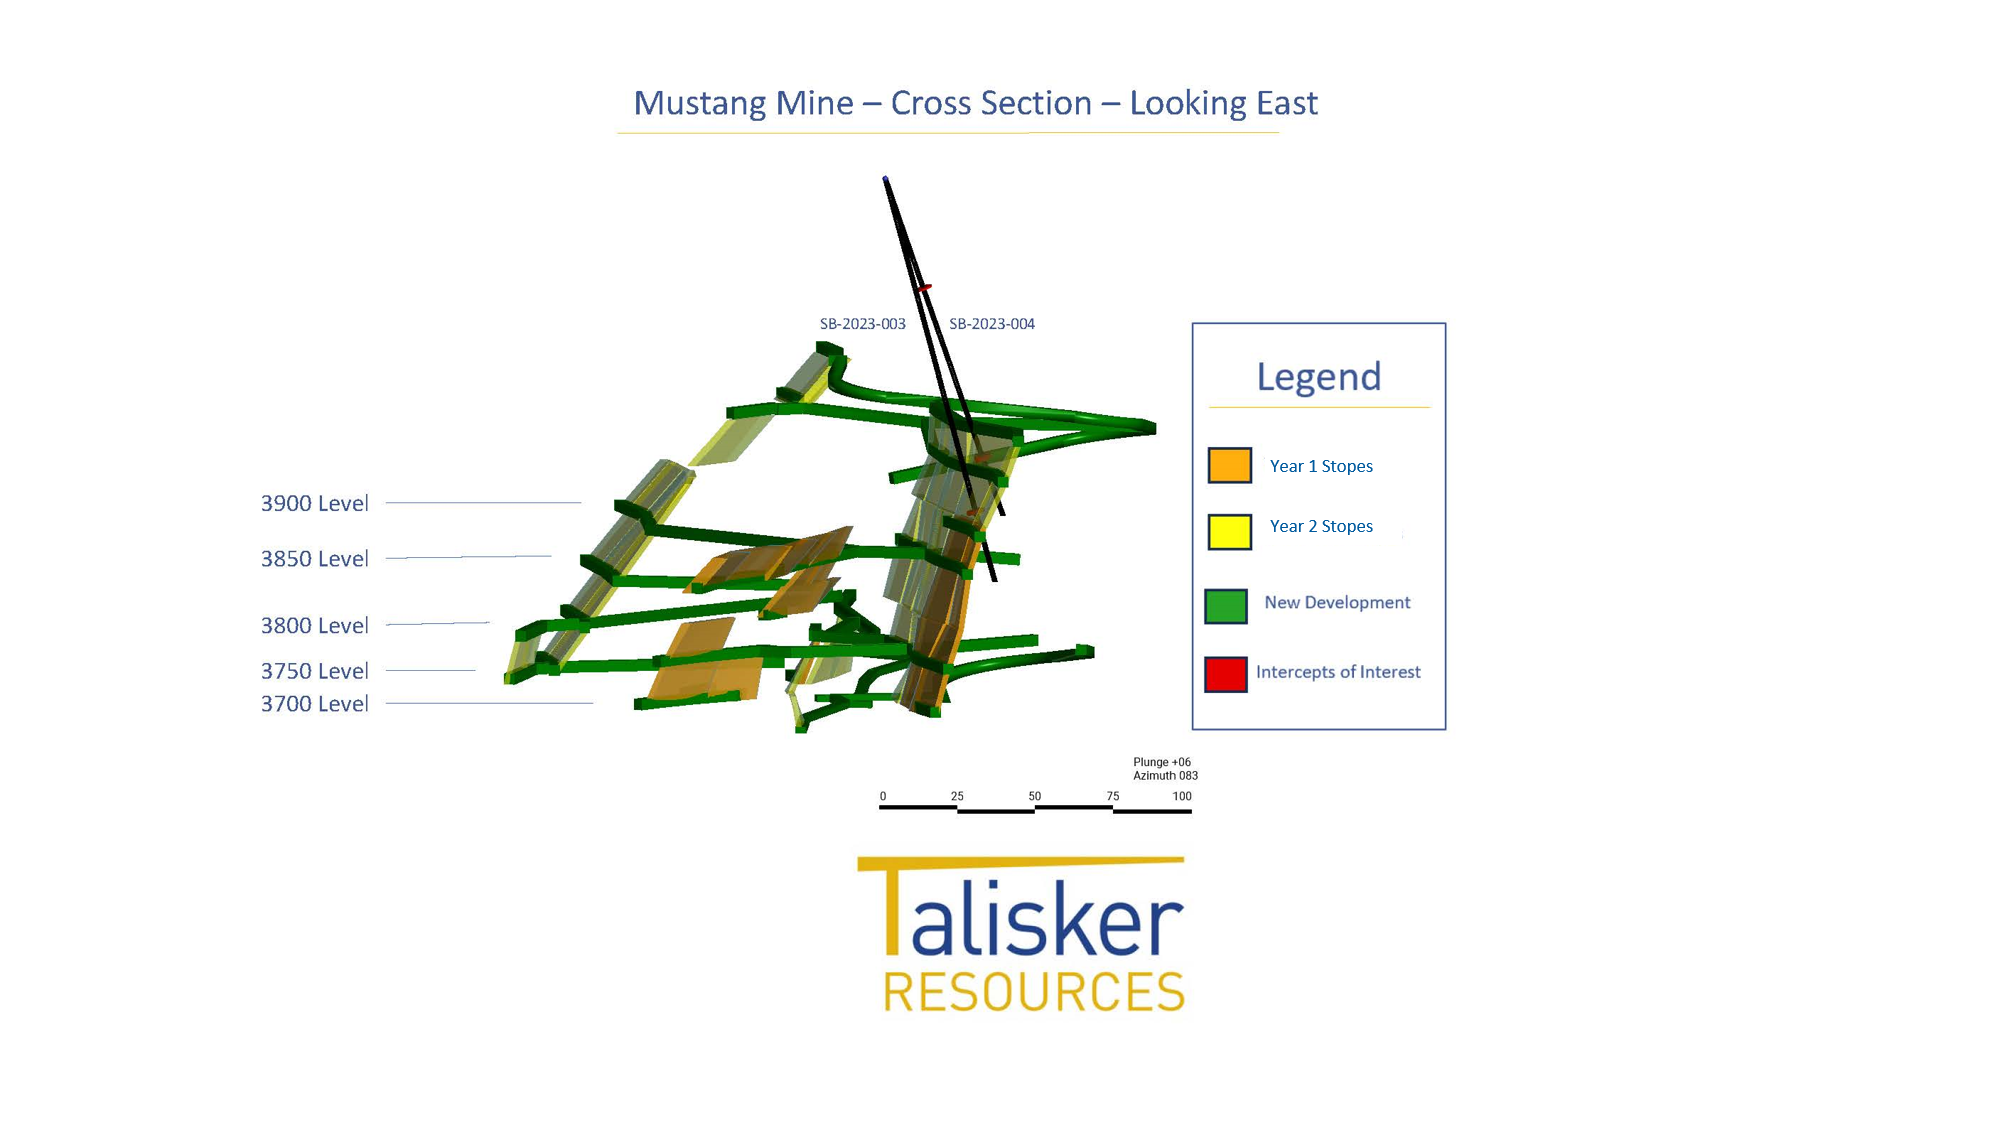 Resource conversion drilling, holes SB-2023-003-004 with year 1 and year 2 stopes in the proposed Mustang Mine.